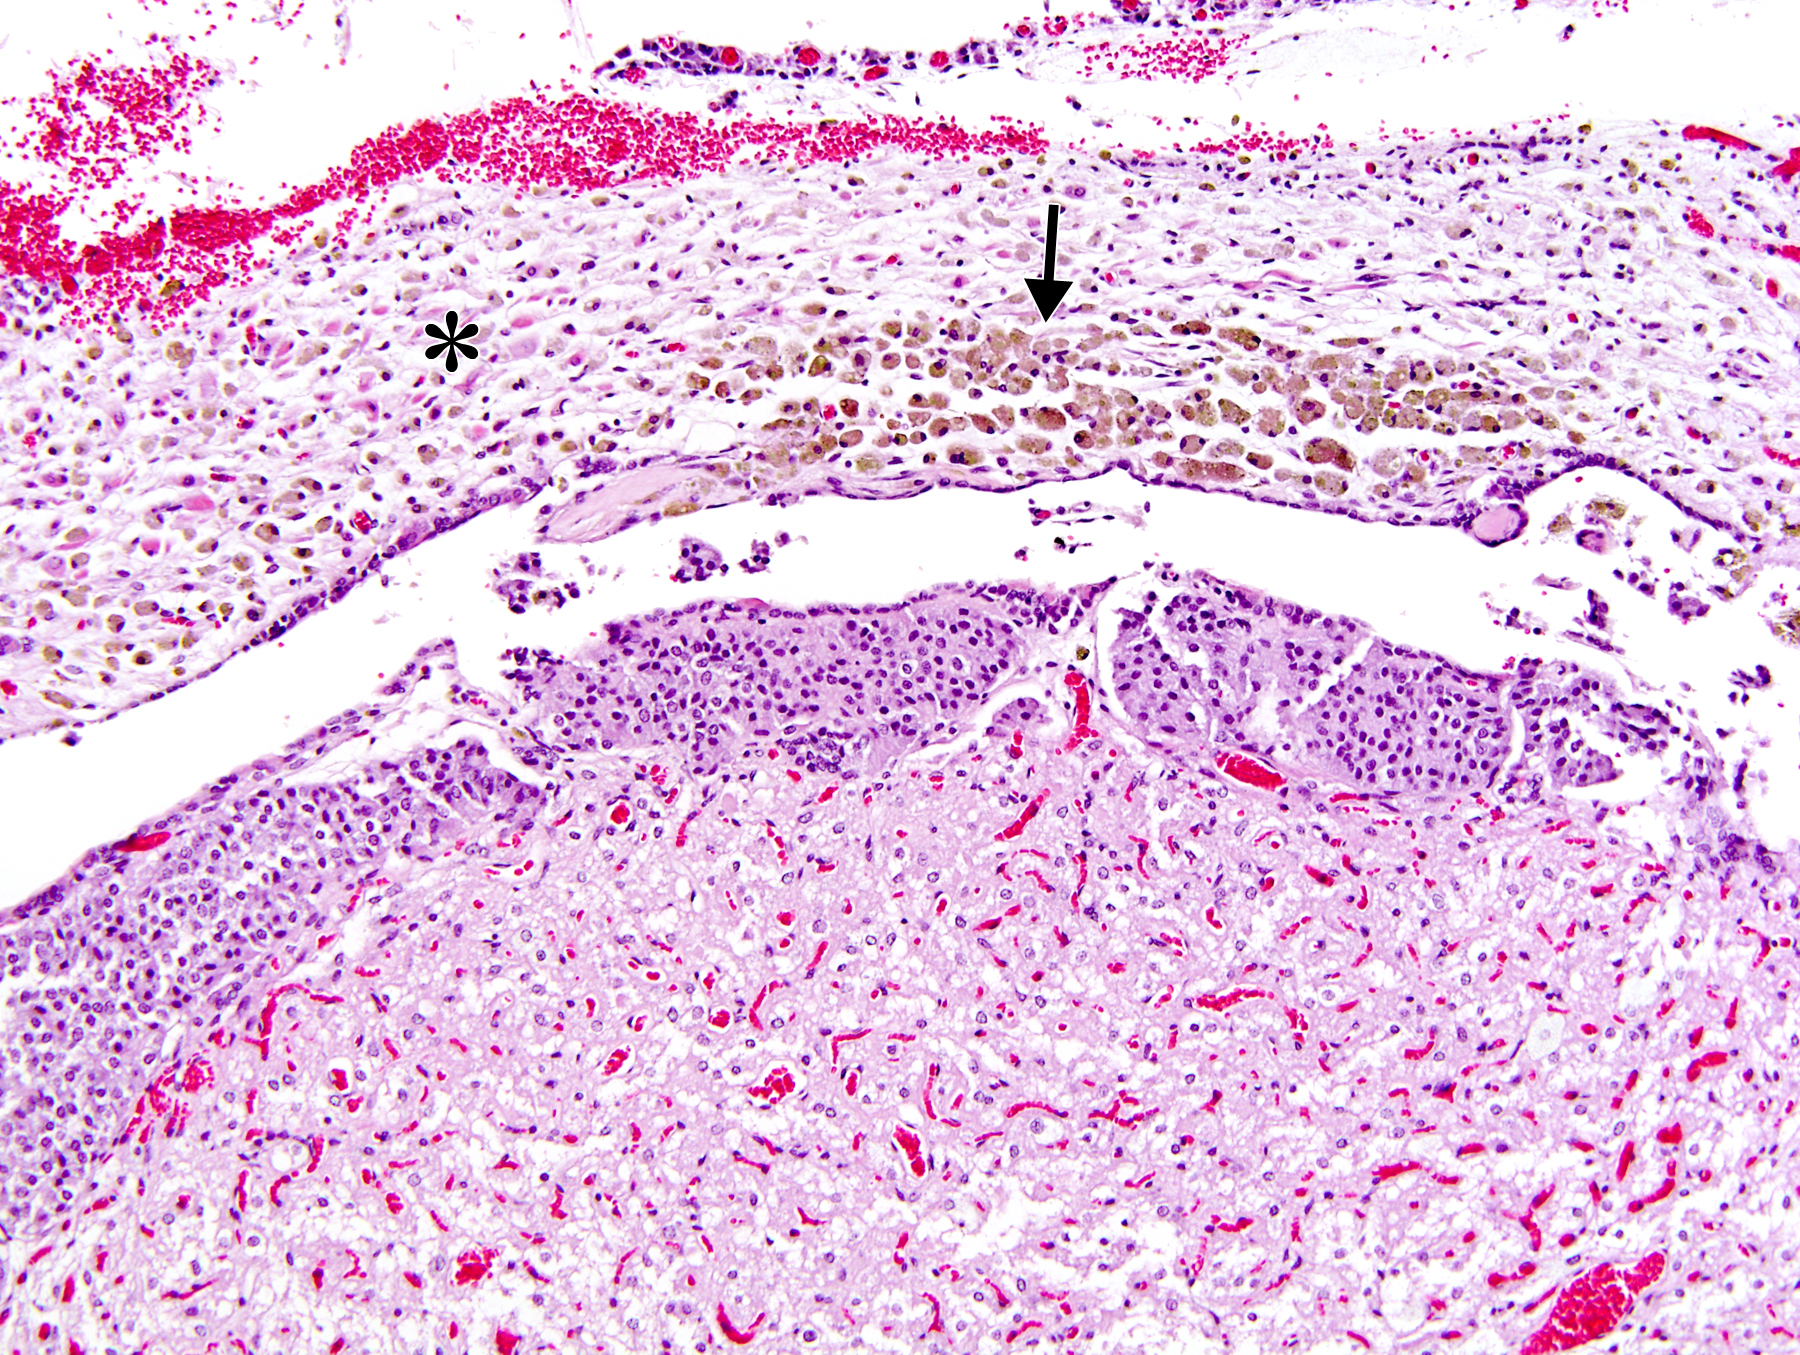 Image of pars distalis atrophy in the pituitary gland from a female F344/N rat in a chronic study